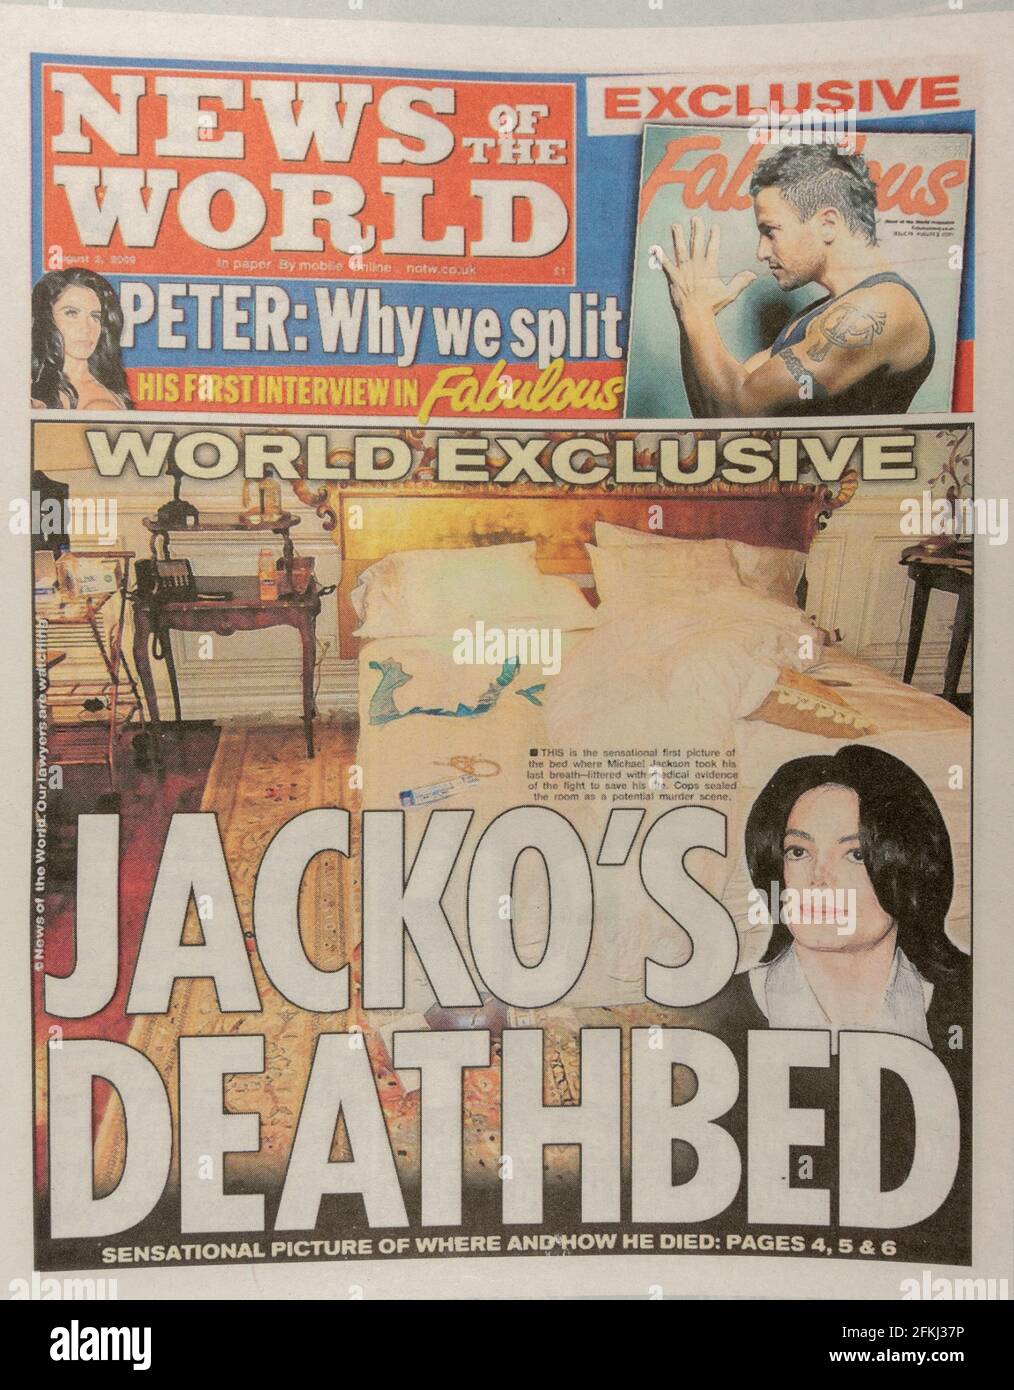 'Jacko's deathbed' headline following the death of Michael Jackson on the front page of the News of the World newspaper (replica) on 2nd August 2009. Stock Photo